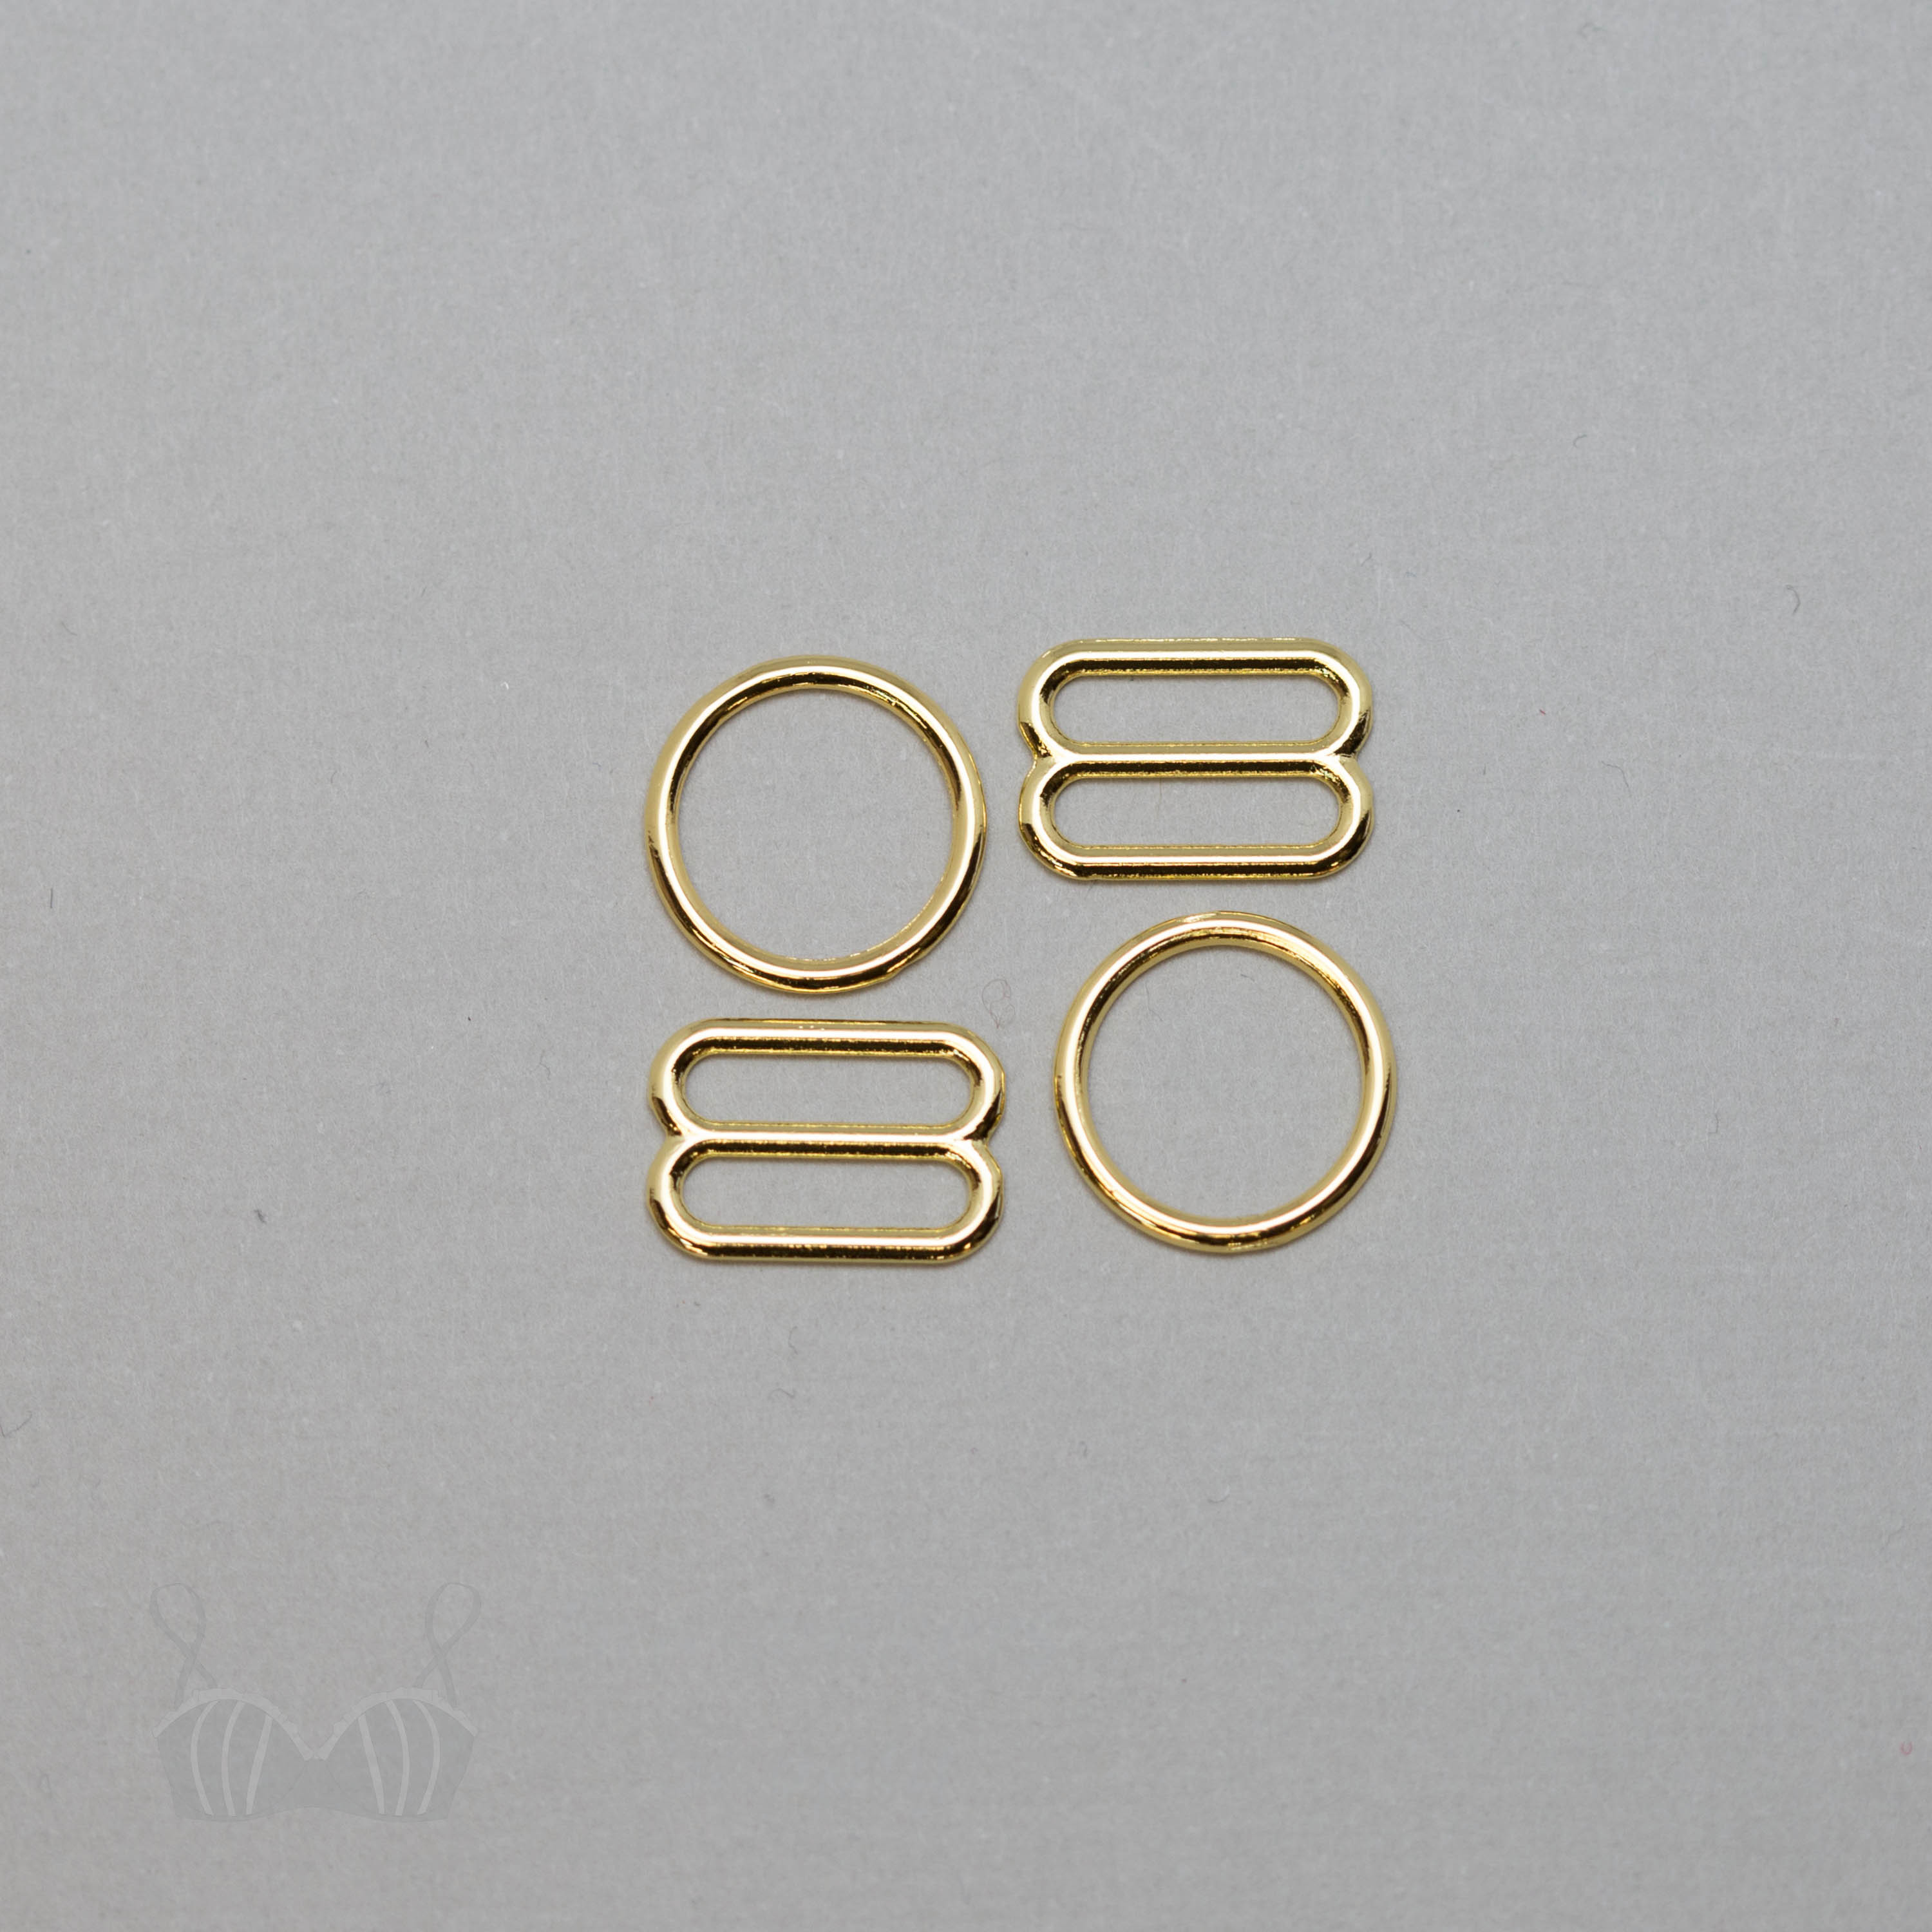 Wholesale 8mm gold bra slider For All Your Intimate Needs 